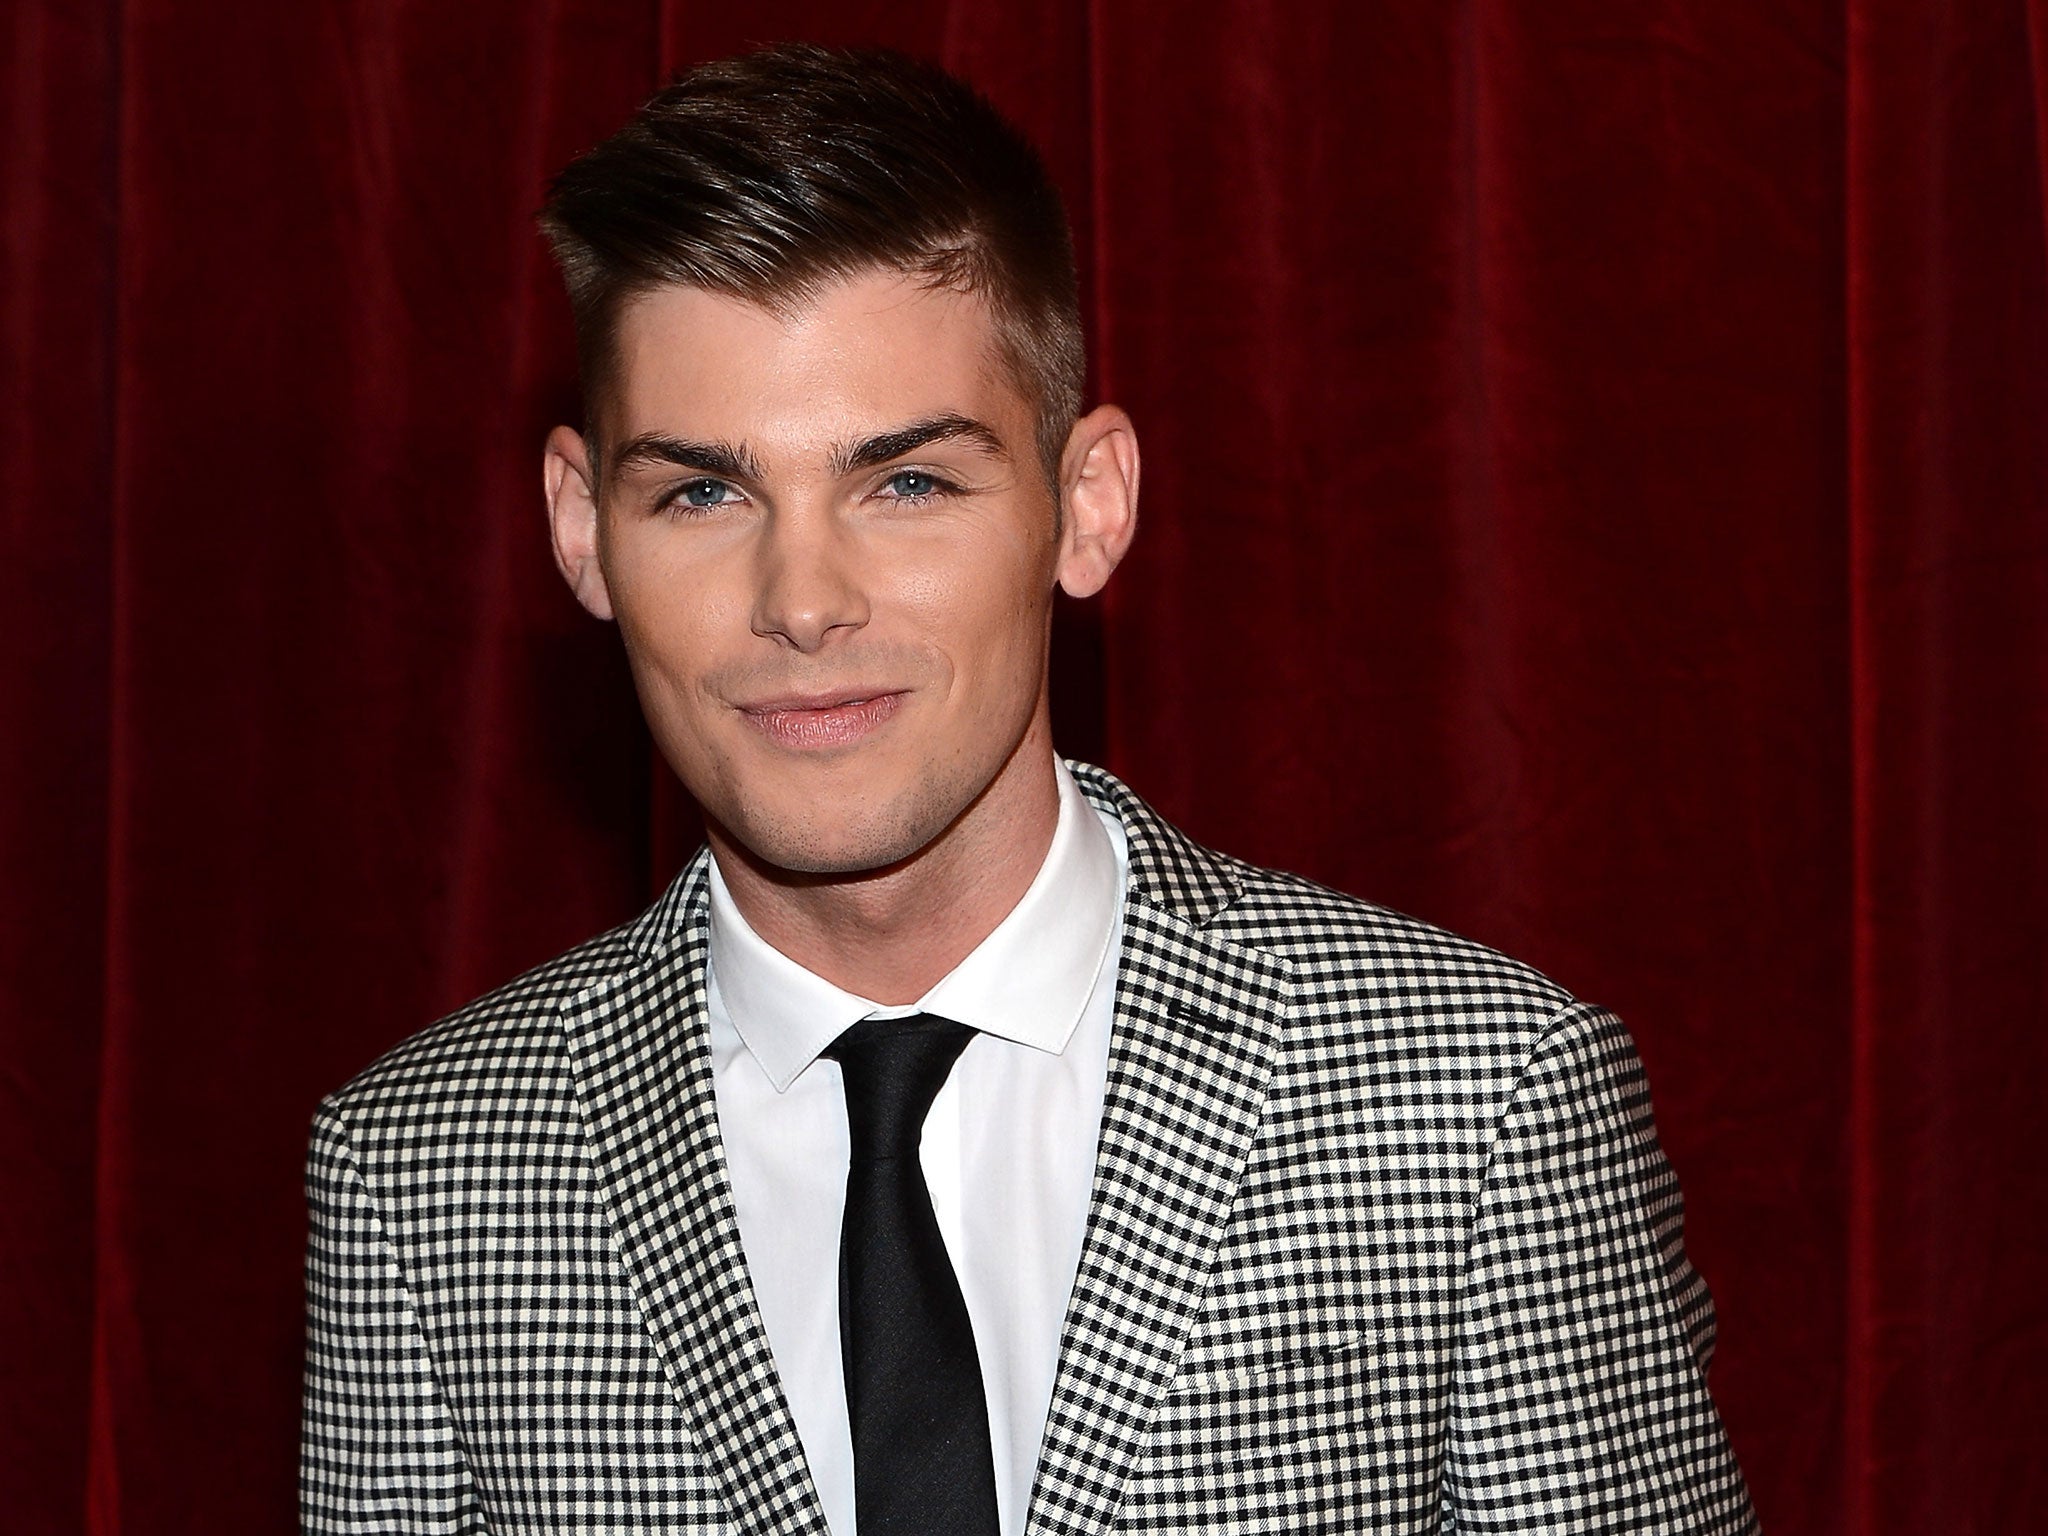 Kieron Richardson plays gay character Ste Hay in Channel 4 soap Hollyoaks